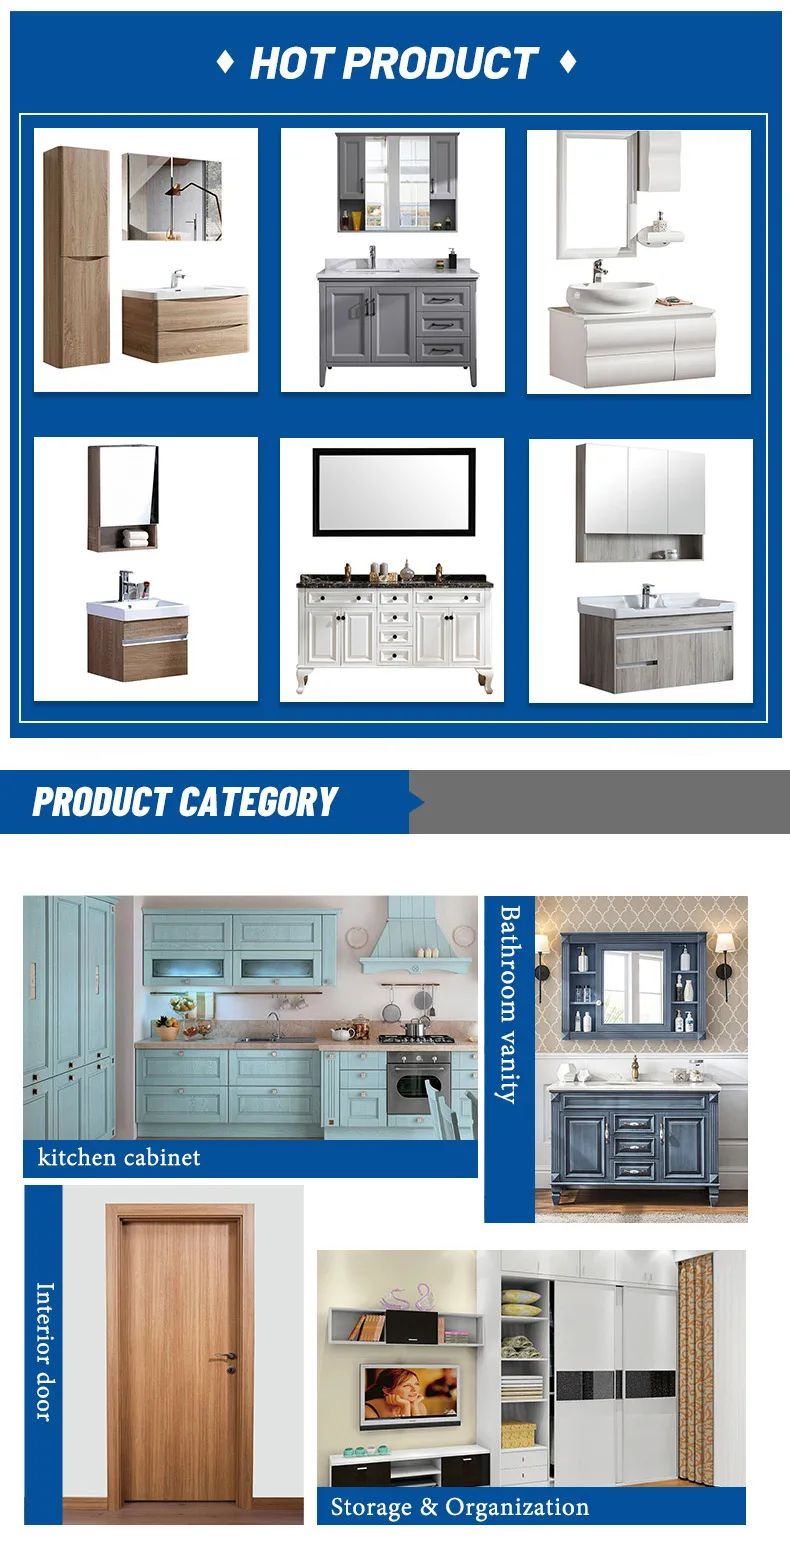 Y&r Furniture China pvc bathroom cabinet manufacturers